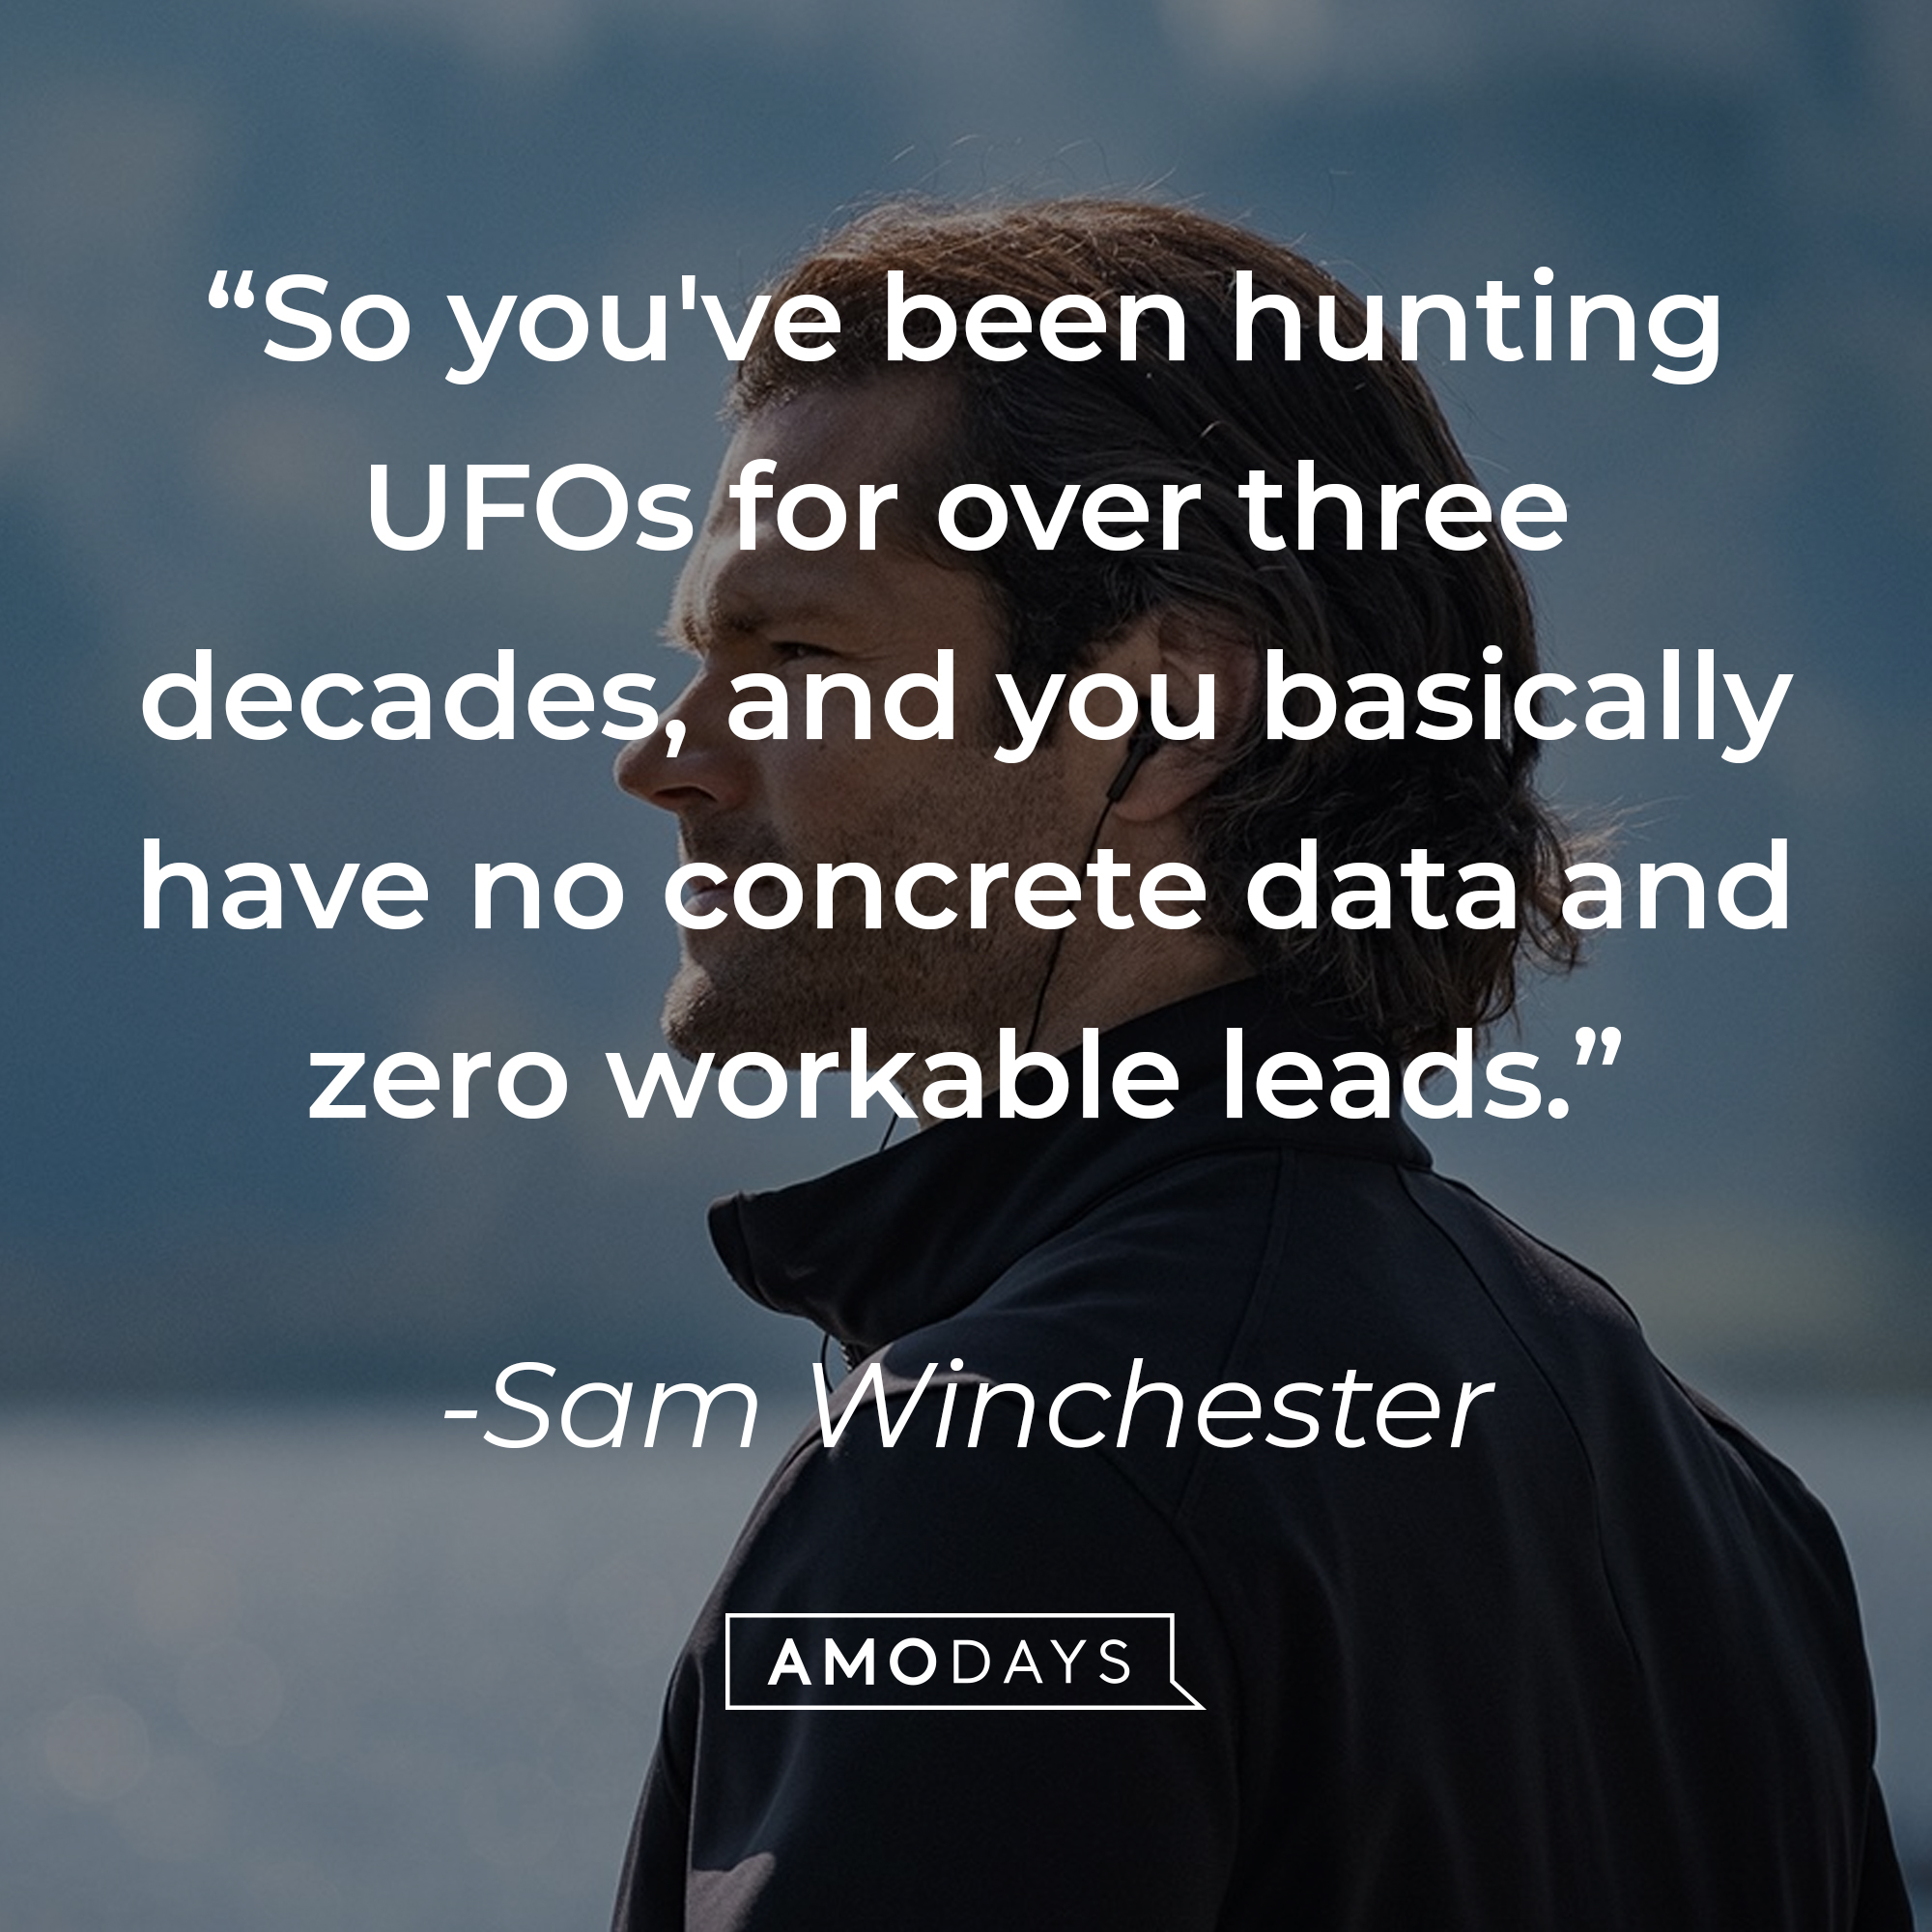 Sam Winchester's quote: "So you've been hunting UFOs for over three decades, and you basically have no concrete data and zero workable leads." | Source: Facebook.com/Supernatural